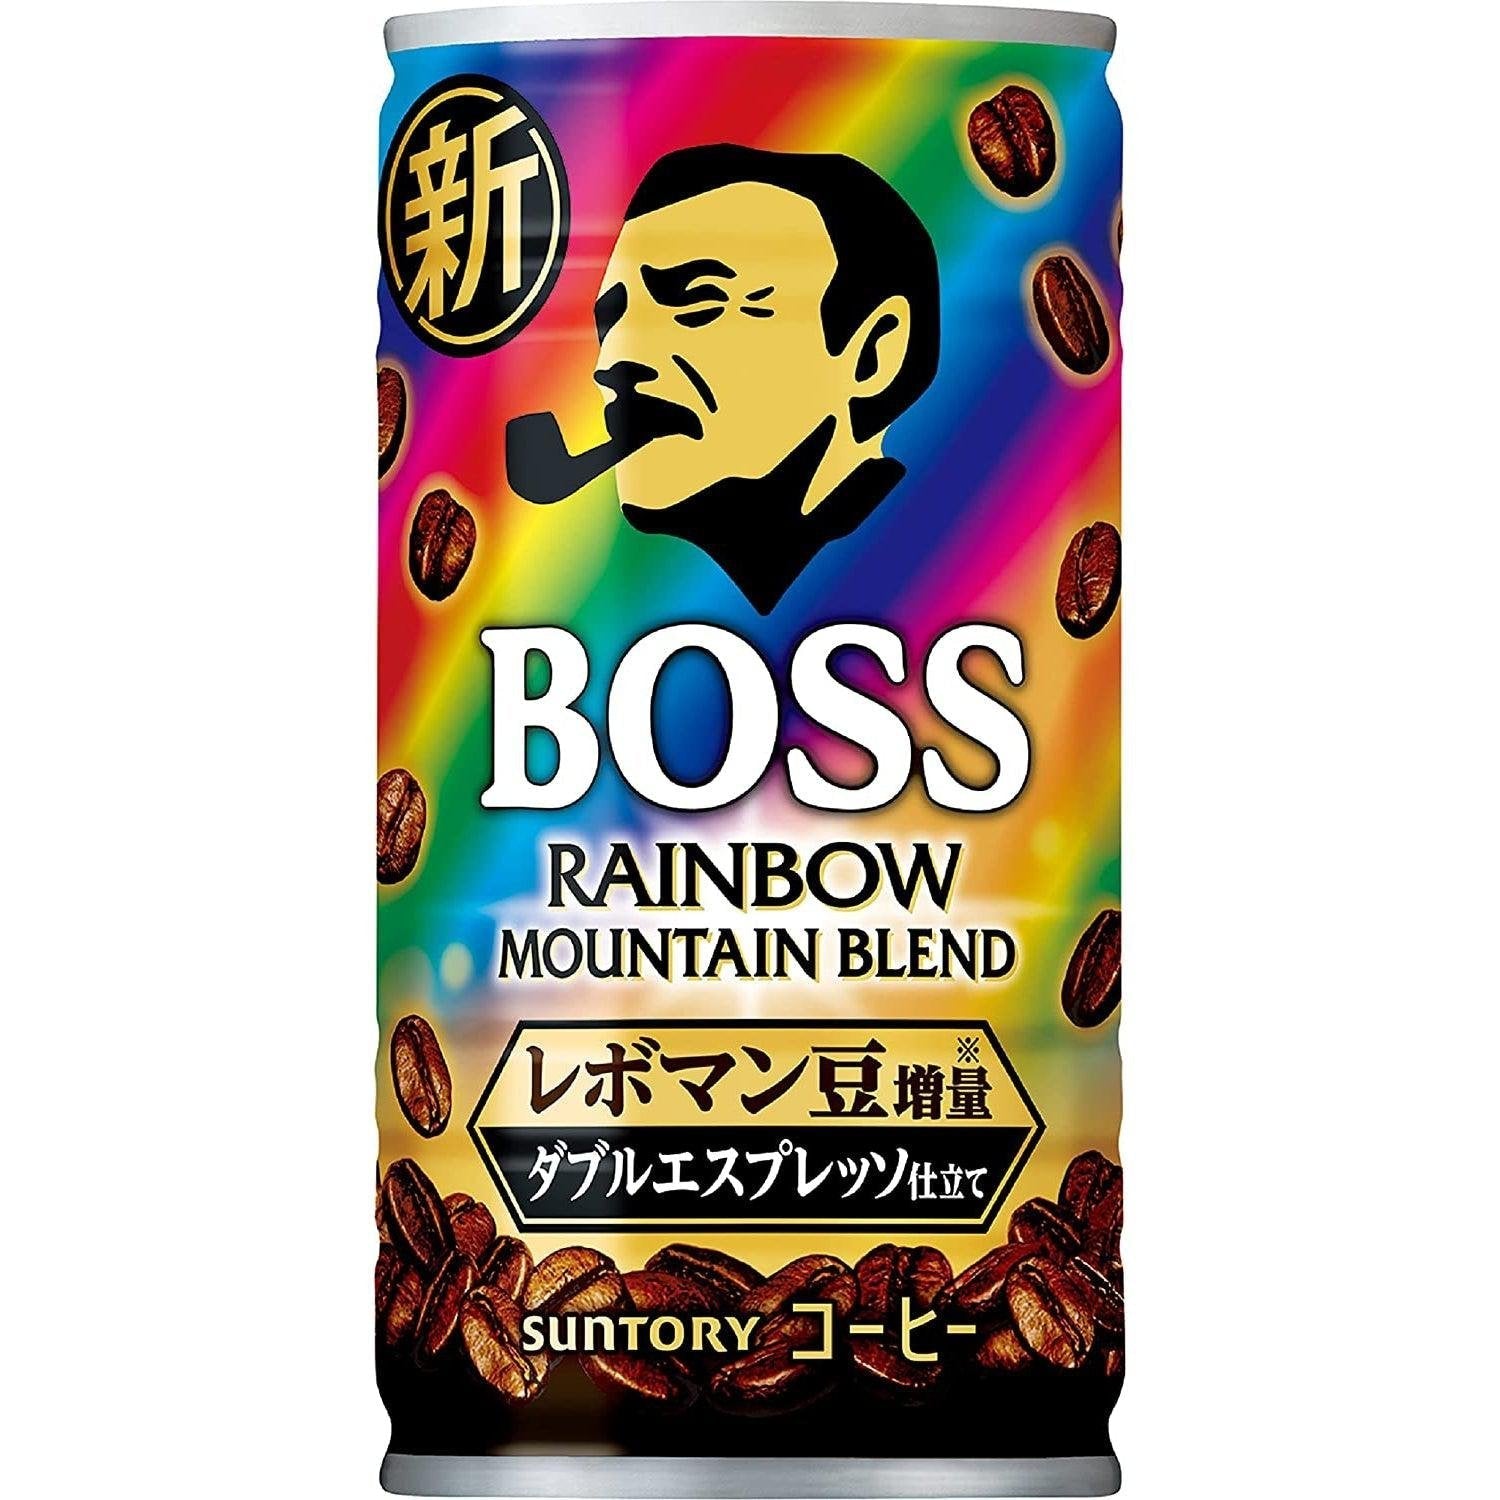 Suntory Boss Rainbow Mountain Blend Canned Coffee (Box of 30 Cans)